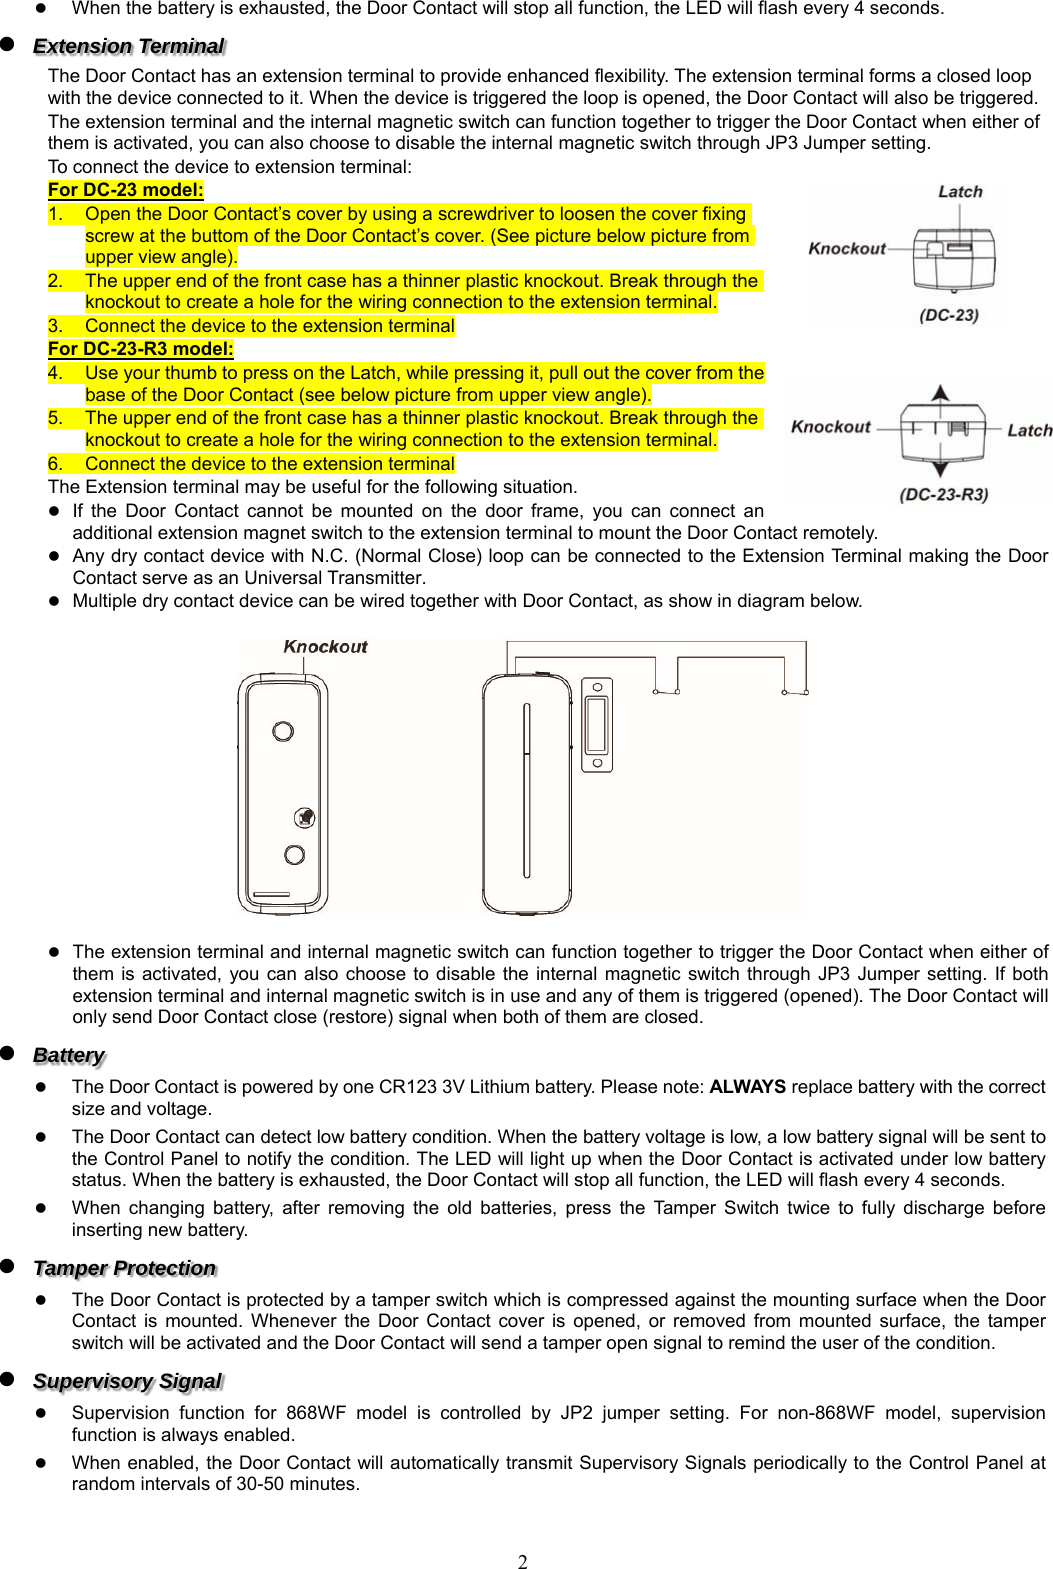  2 When the battery is exhausted, the Door Contact will stop all function, the LED will flash every 4 seconds.  Extension Terminal     The Door Contact has an extension terminal to provide enhanced flexibility. The extension terminal forms a closed loop with the device connected to it. When the device is triggered the loop is opened, the Door Contact will also be triggered. The extension terminal and the internal magnetic switch can function together to trigger the Door Contact when either of them is activated, you can also choose to disable the internal magnetic switch through JP3 Jumper setting. To connect the device to extension terminal: For DC-23 model: 1.  Open the Door Contact’s cover by using a screwdriver to loosen the cover fixing screw at the buttom of the Door Contact’s cover. (See picture below picture from upper view angle). 2.  The upper end of the front case has a thinner plastic knockout. Break through the knockout to create a hole for the wiring connection to the extension terminal. 3.  Connect the device to the extension terminal For DC-23-R3 model: 4.  Use your thumb to press on the Latch, while pressing it, pull out the cover from the base of the Door Contact (see below picture from upper view angle). 5.  The upper end of the front case has a thinner plastic knockout. Break through the knockout to create a hole for the wiring connection to the extension terminal. 6.  Connect the device to the extension terminal The Extension terminal may be useful for the following situation.  If  the  Door  Contact  cannot  be  mounted  on  the  door  frame,  you  can  connect  an additional extension magnet switch to the extension terminal to mount the Door Contact remotely.  Any dry contact device with N.C. (Normal Close) loop can be connected to the Extension Terminal making the Door Contact serve as an Universal Transmitter.  Multiple dry contact device can be wired together with Door Contact, as show in diagram below.     The extension terminal and internal magnetic switch can function together to trigger the Door Contact when either of them is activated,  you  can  also  choose  to  disable  the  internal  magnetic switch  through  JP3  Jumper  setting.  If both extension terminal and internal magnetic switch is in use and any of them is triggered (opened). The Door Contact will only send Door Contact close (restore) signal when both of them are closed.  Battery   The Door Contact is powered by one CR123 3V Lithium battery. Please note: ALWAYS replace battery with the correct size and voltage.    The Door Contact can detect low battery condition. When the battery voltage is low, a low battery signal will be sent to the Control Panel to notify the condition. The LED will light up when the Door Contact is activated under low battery status. When the battery is exhausted, the Door Contact will stop all function, the LED will flash every 4 seconds.  When  changing  battery,  after  removing  the  old  batteries,  press  the  Tamper  Switch  twice  to  fully  discharge  before inserting new battery.  Tamper Protection  The Door Contact is protected by a tamper switch which is compressed against the mounting surface when the Door Contact  is  mounted.  Whenever  the  Door  Contact  cover  is  opened,  or  removed  from mounted  surface,  the  tamper switch will be activated and the Door Contact will send a tamper open signal to remind the user of the condition.  Supervisory Signal    Supervision  function  for  868WF  model  is  controlled  by  JP2  jumper  setting.  For  non-868WF  model,  supervision function is always enabled.  When enabled, the Door Contact will automatically transmit Supervisory Signals periodically to the Control Panel at random intervals of 30-50 minutes. 